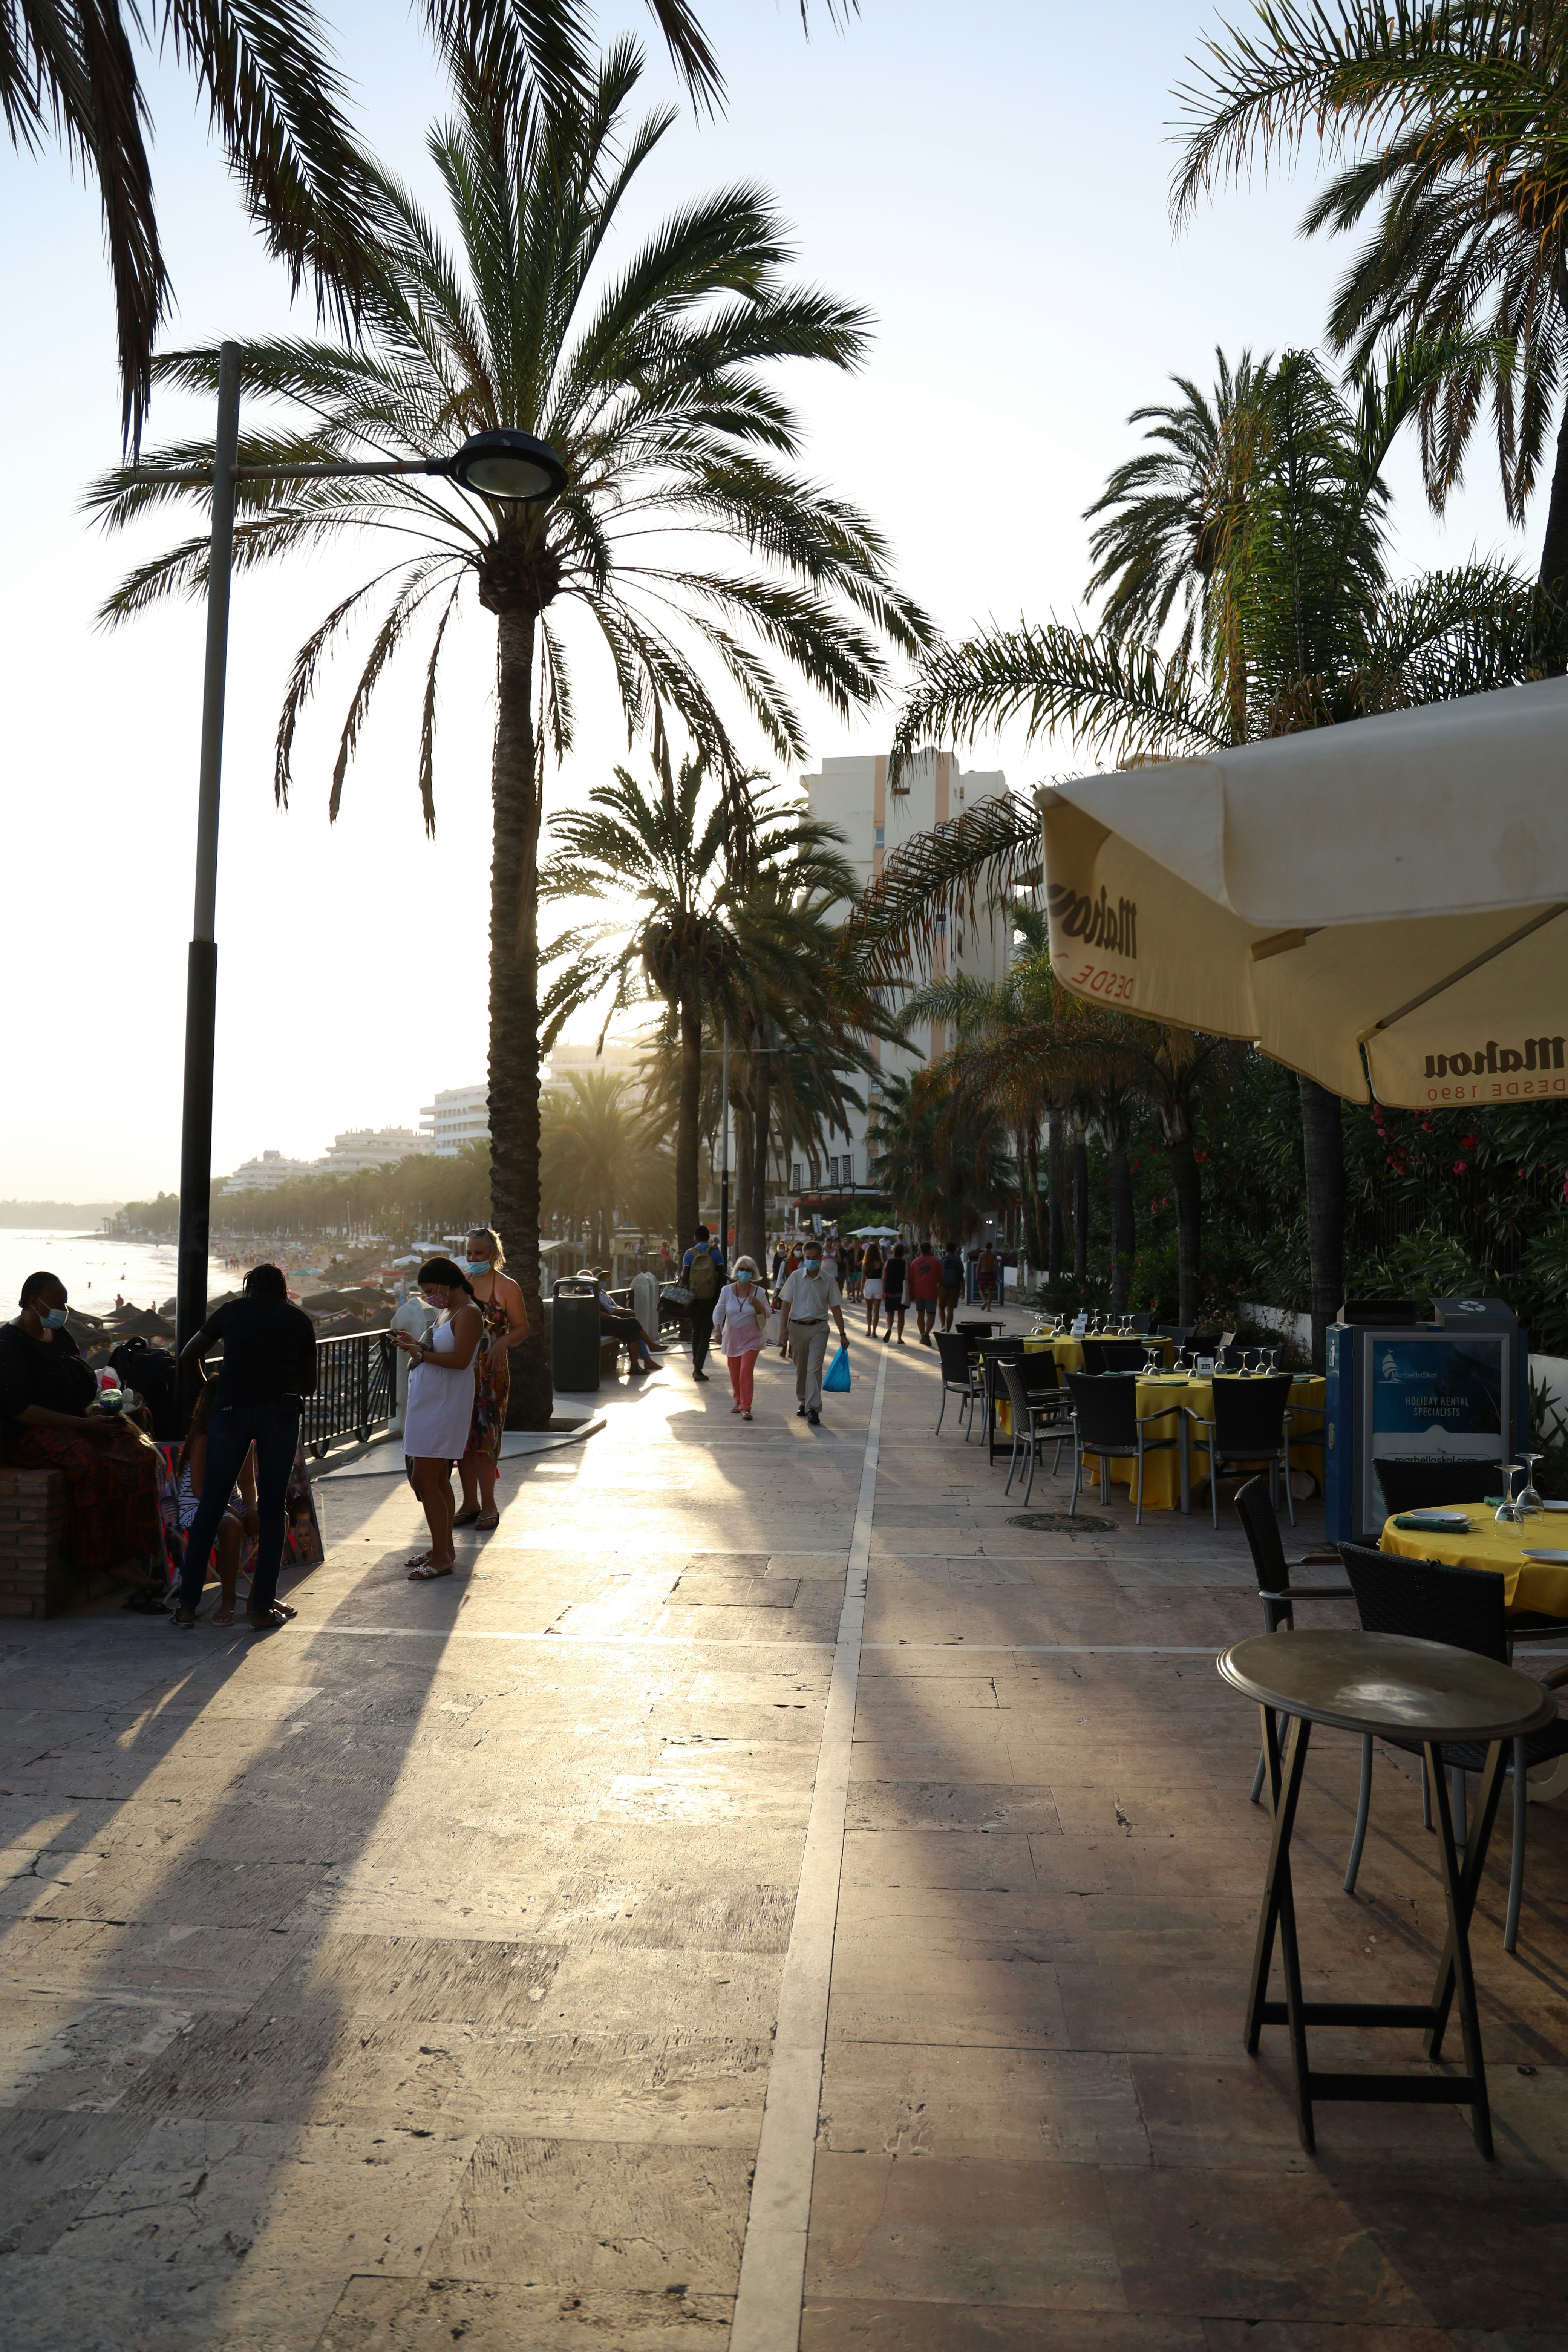 Sun-drenched Marbella promenade lined with palm trees and outdoor cafes, bustling with locals and visitors enjoying the coastal charm